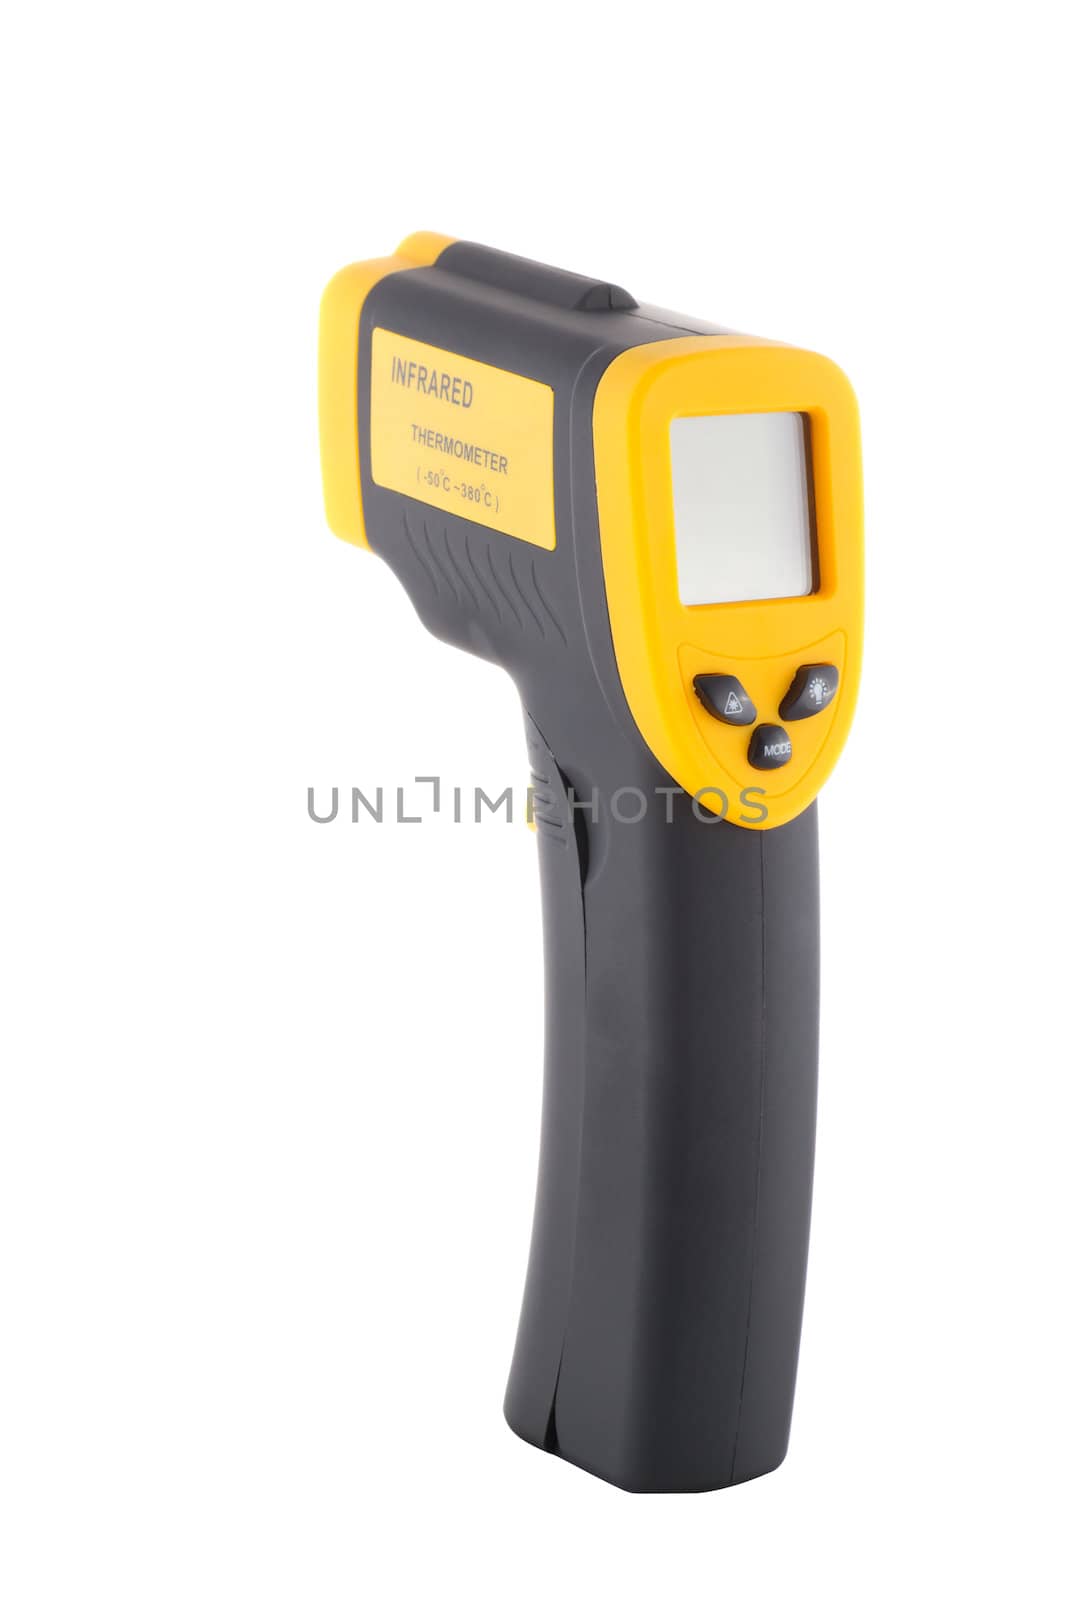 infrared thermometer by Marina_Po